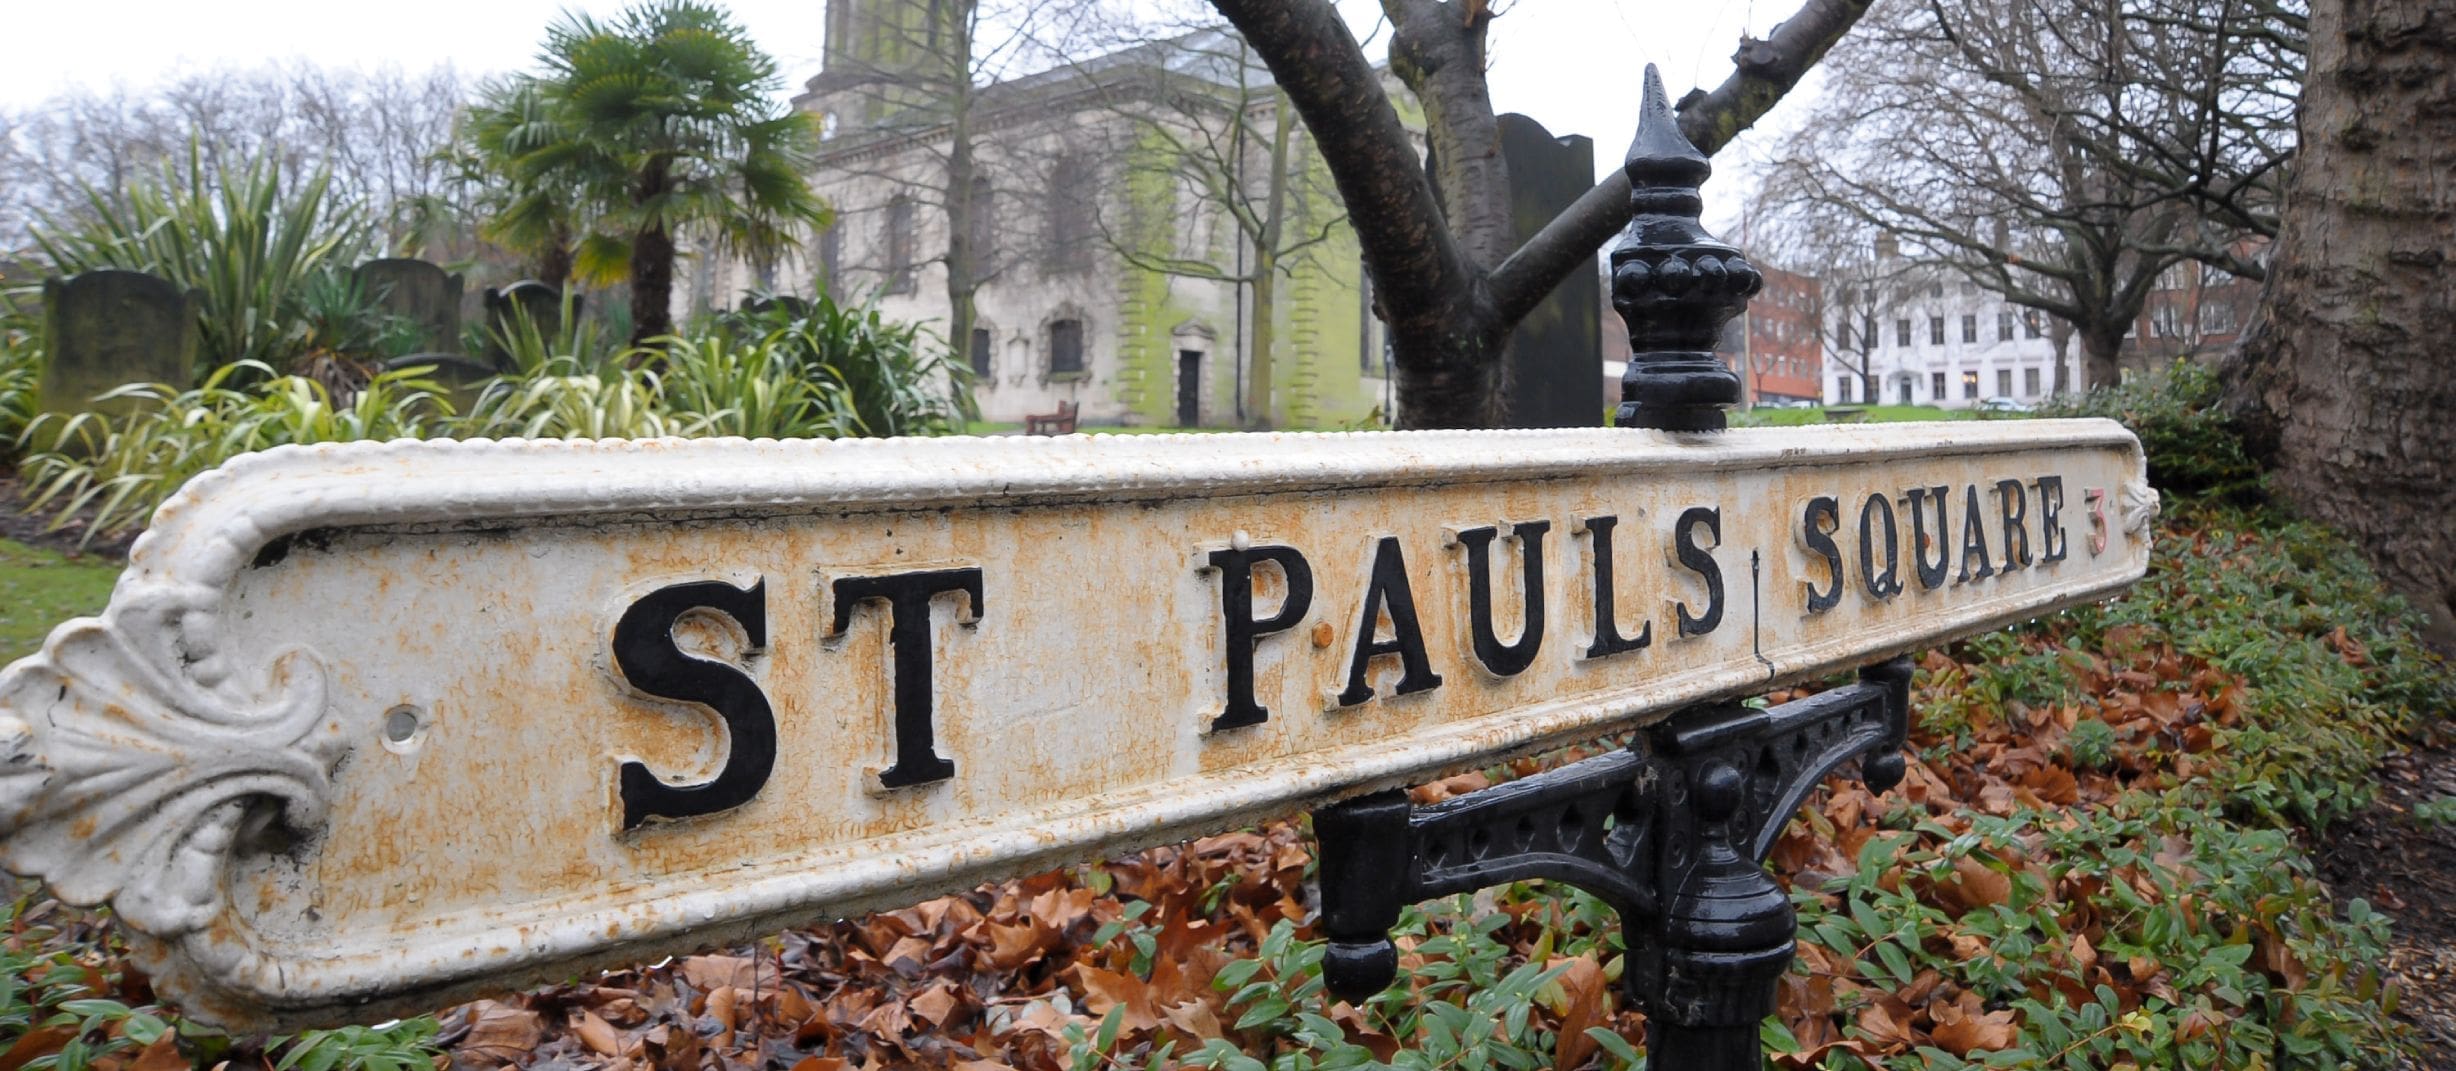 st pauls square sign with church in background